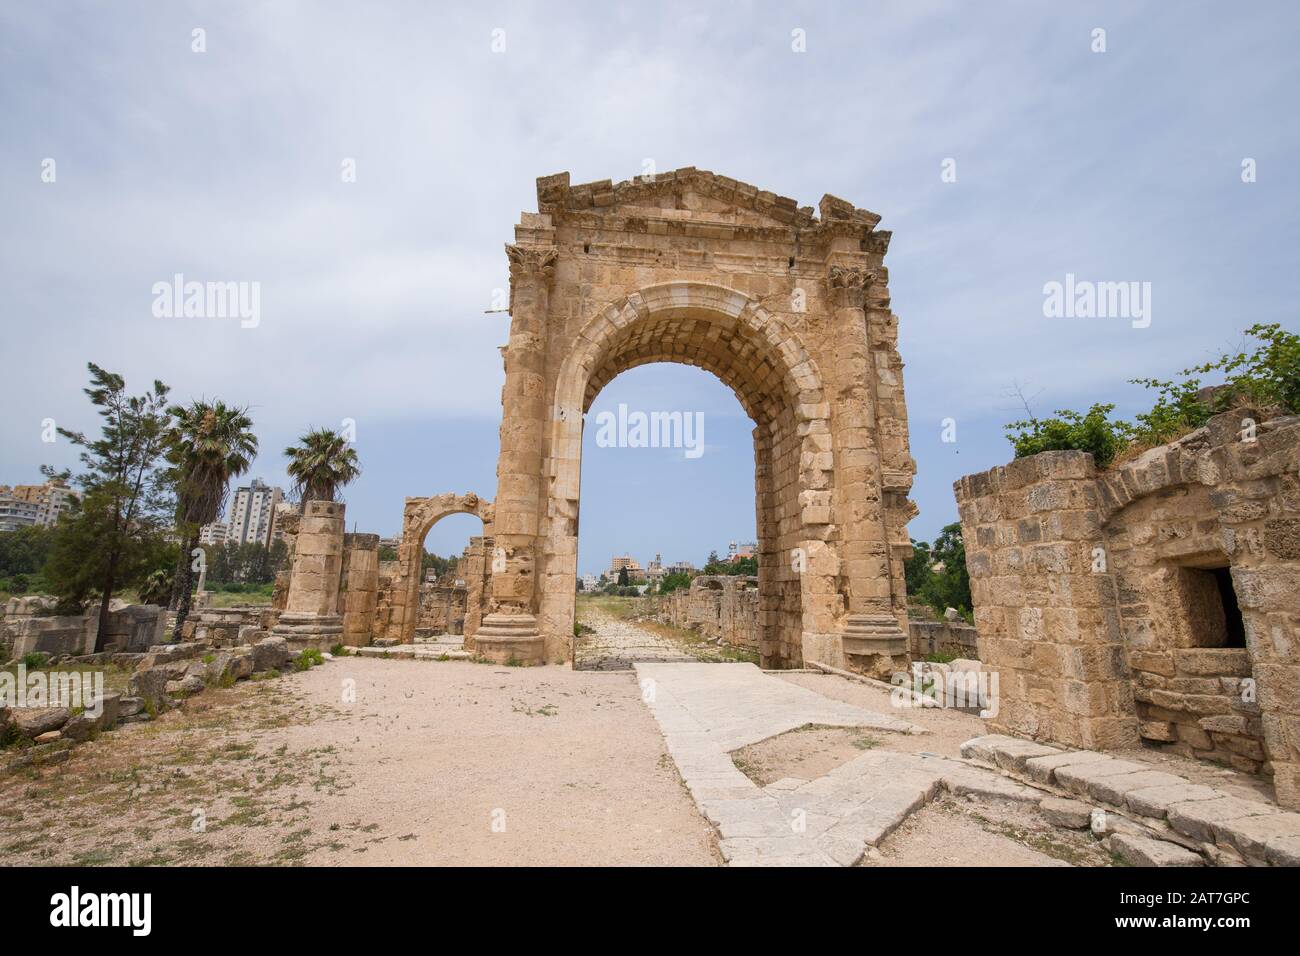 The arch of triumph. Roman remains in Tyre. Tyre is an ancient Phoenician city. Tyre, Lebanon - June, 2019 Stock Photo